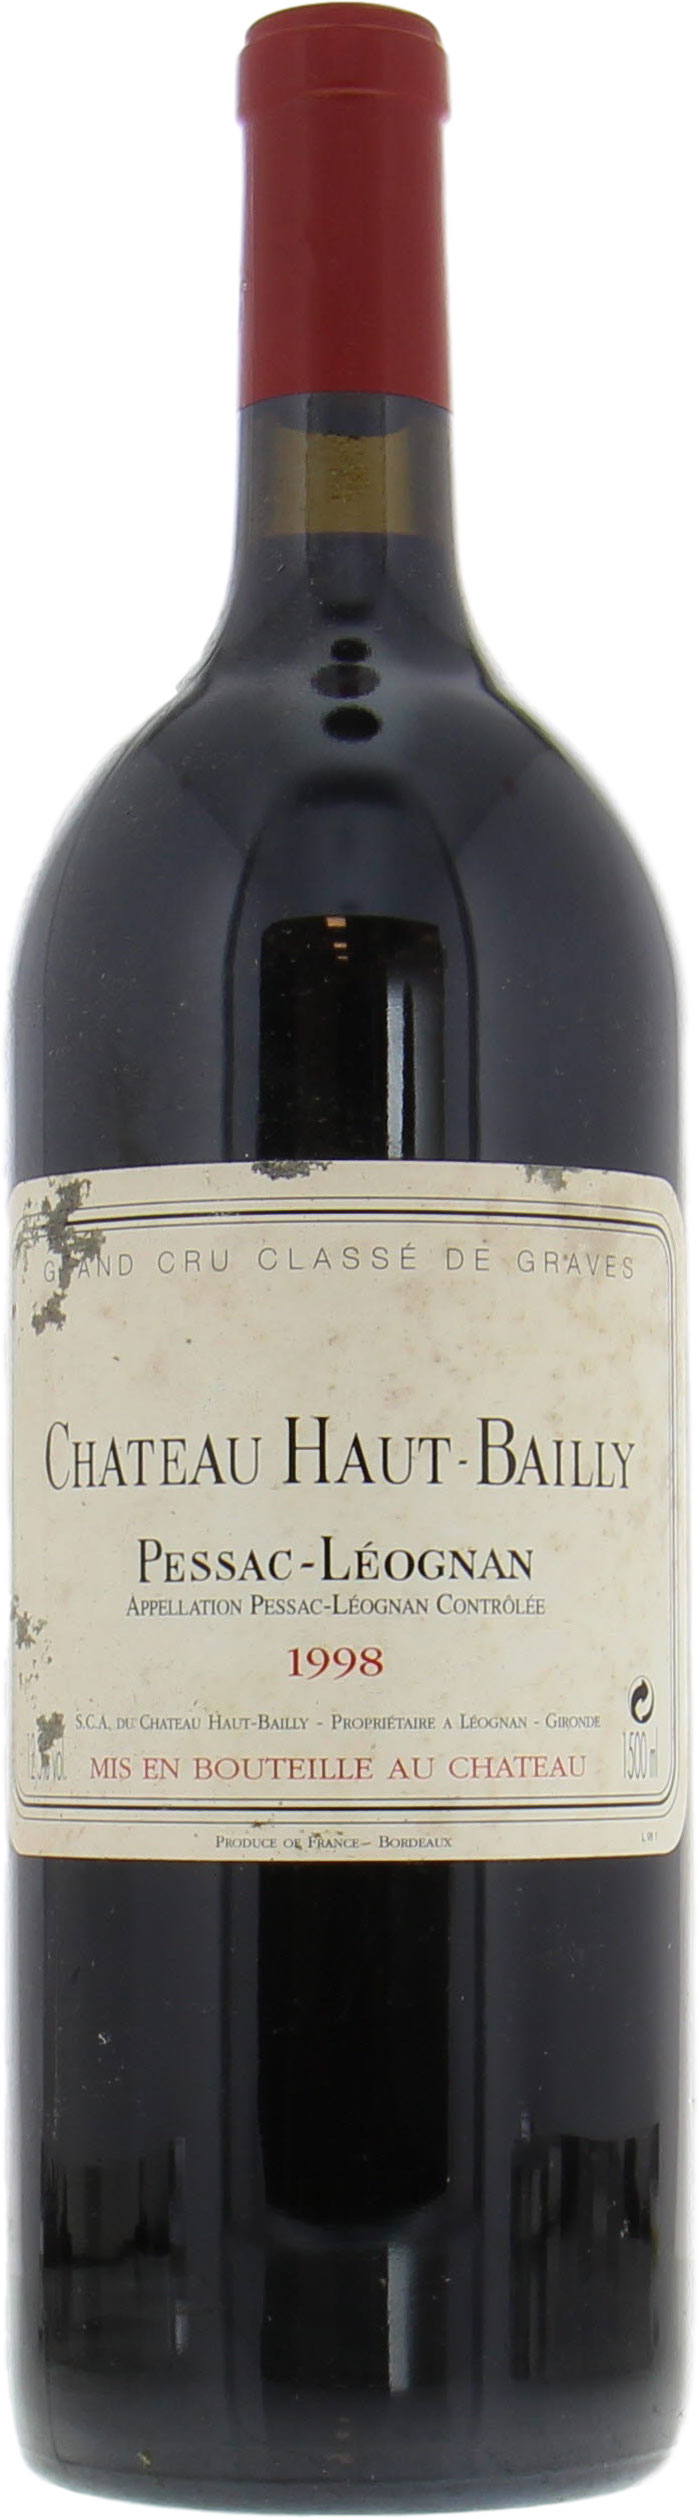 Chateau Haut Bailly - Chateau Haut Bailly 1998 From Original Wooden Case